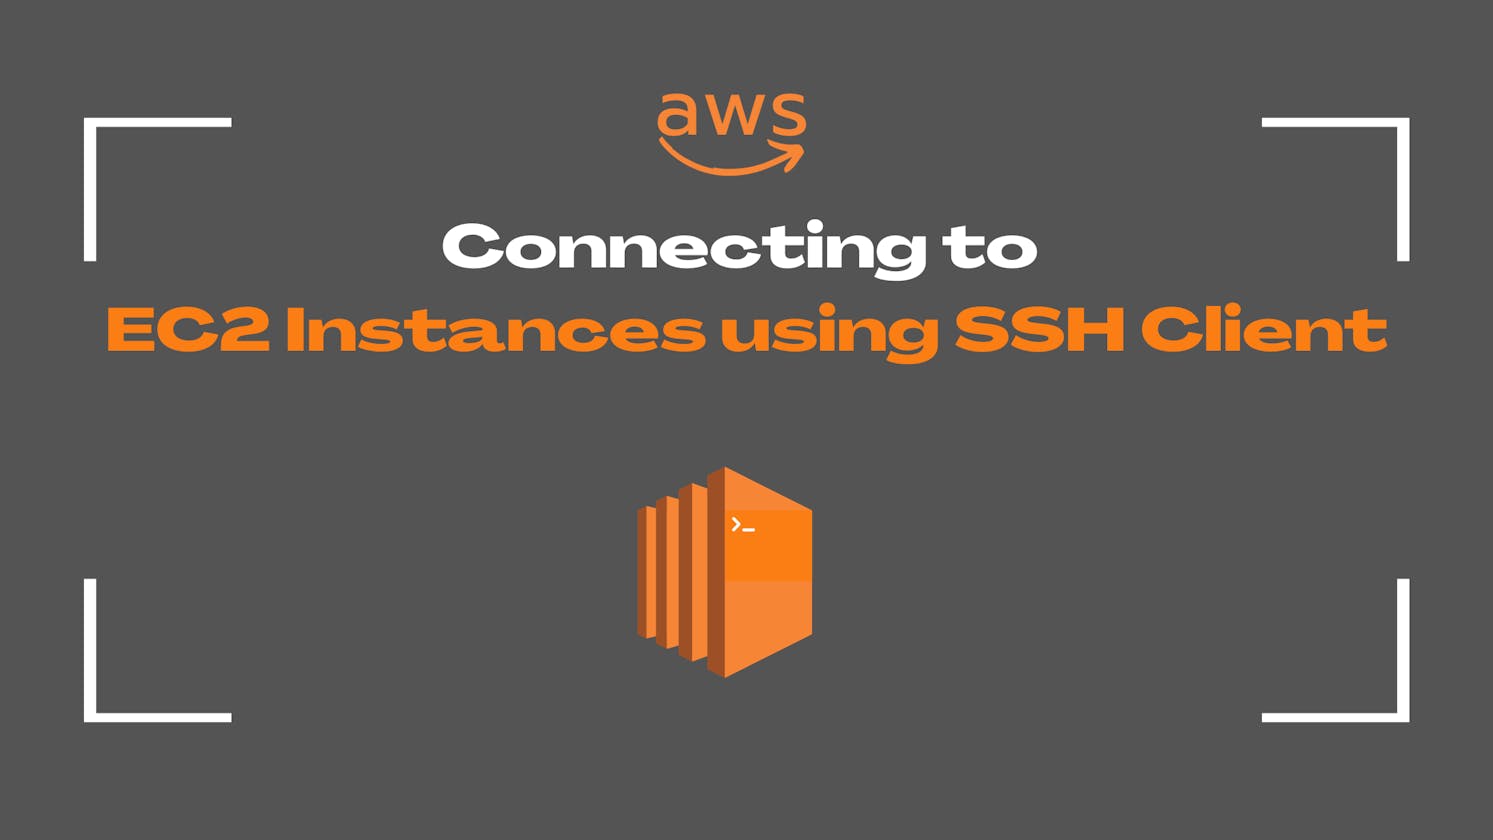 Step-by-Step Guide on Connecting to EC2 Instances through SSH Client